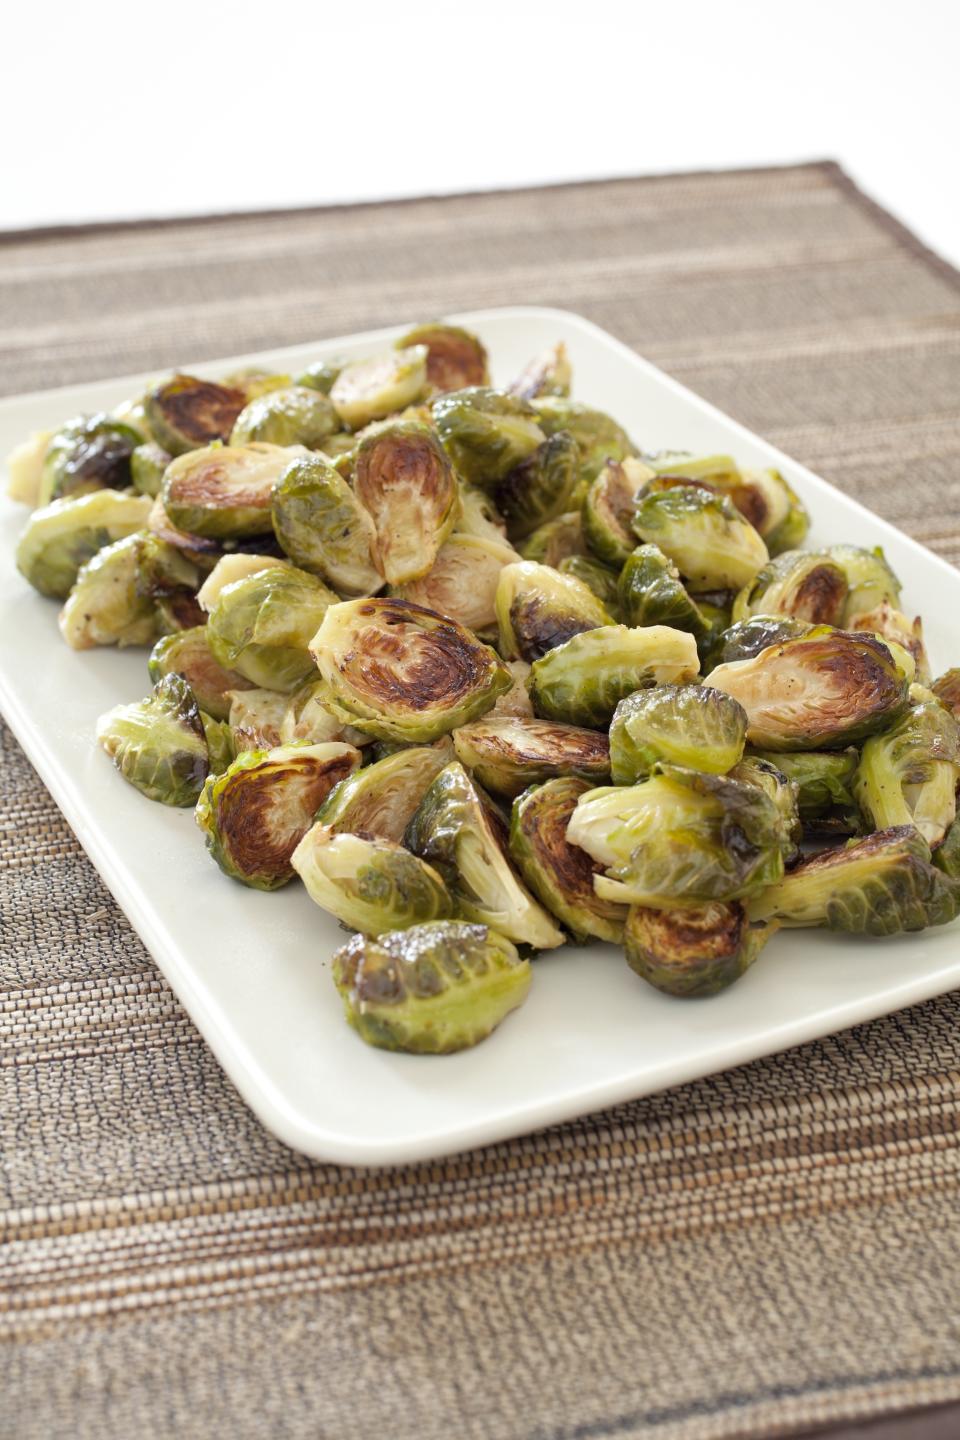 This undated photo provided by America's Test Kitchen in November 2018 shows roasted Brussels sprouts in Brookline, Mass. This recipe appears in the cookbook "Complete Make-Ahead." (Carl Tremblay/America's Test Kitchen via AP)